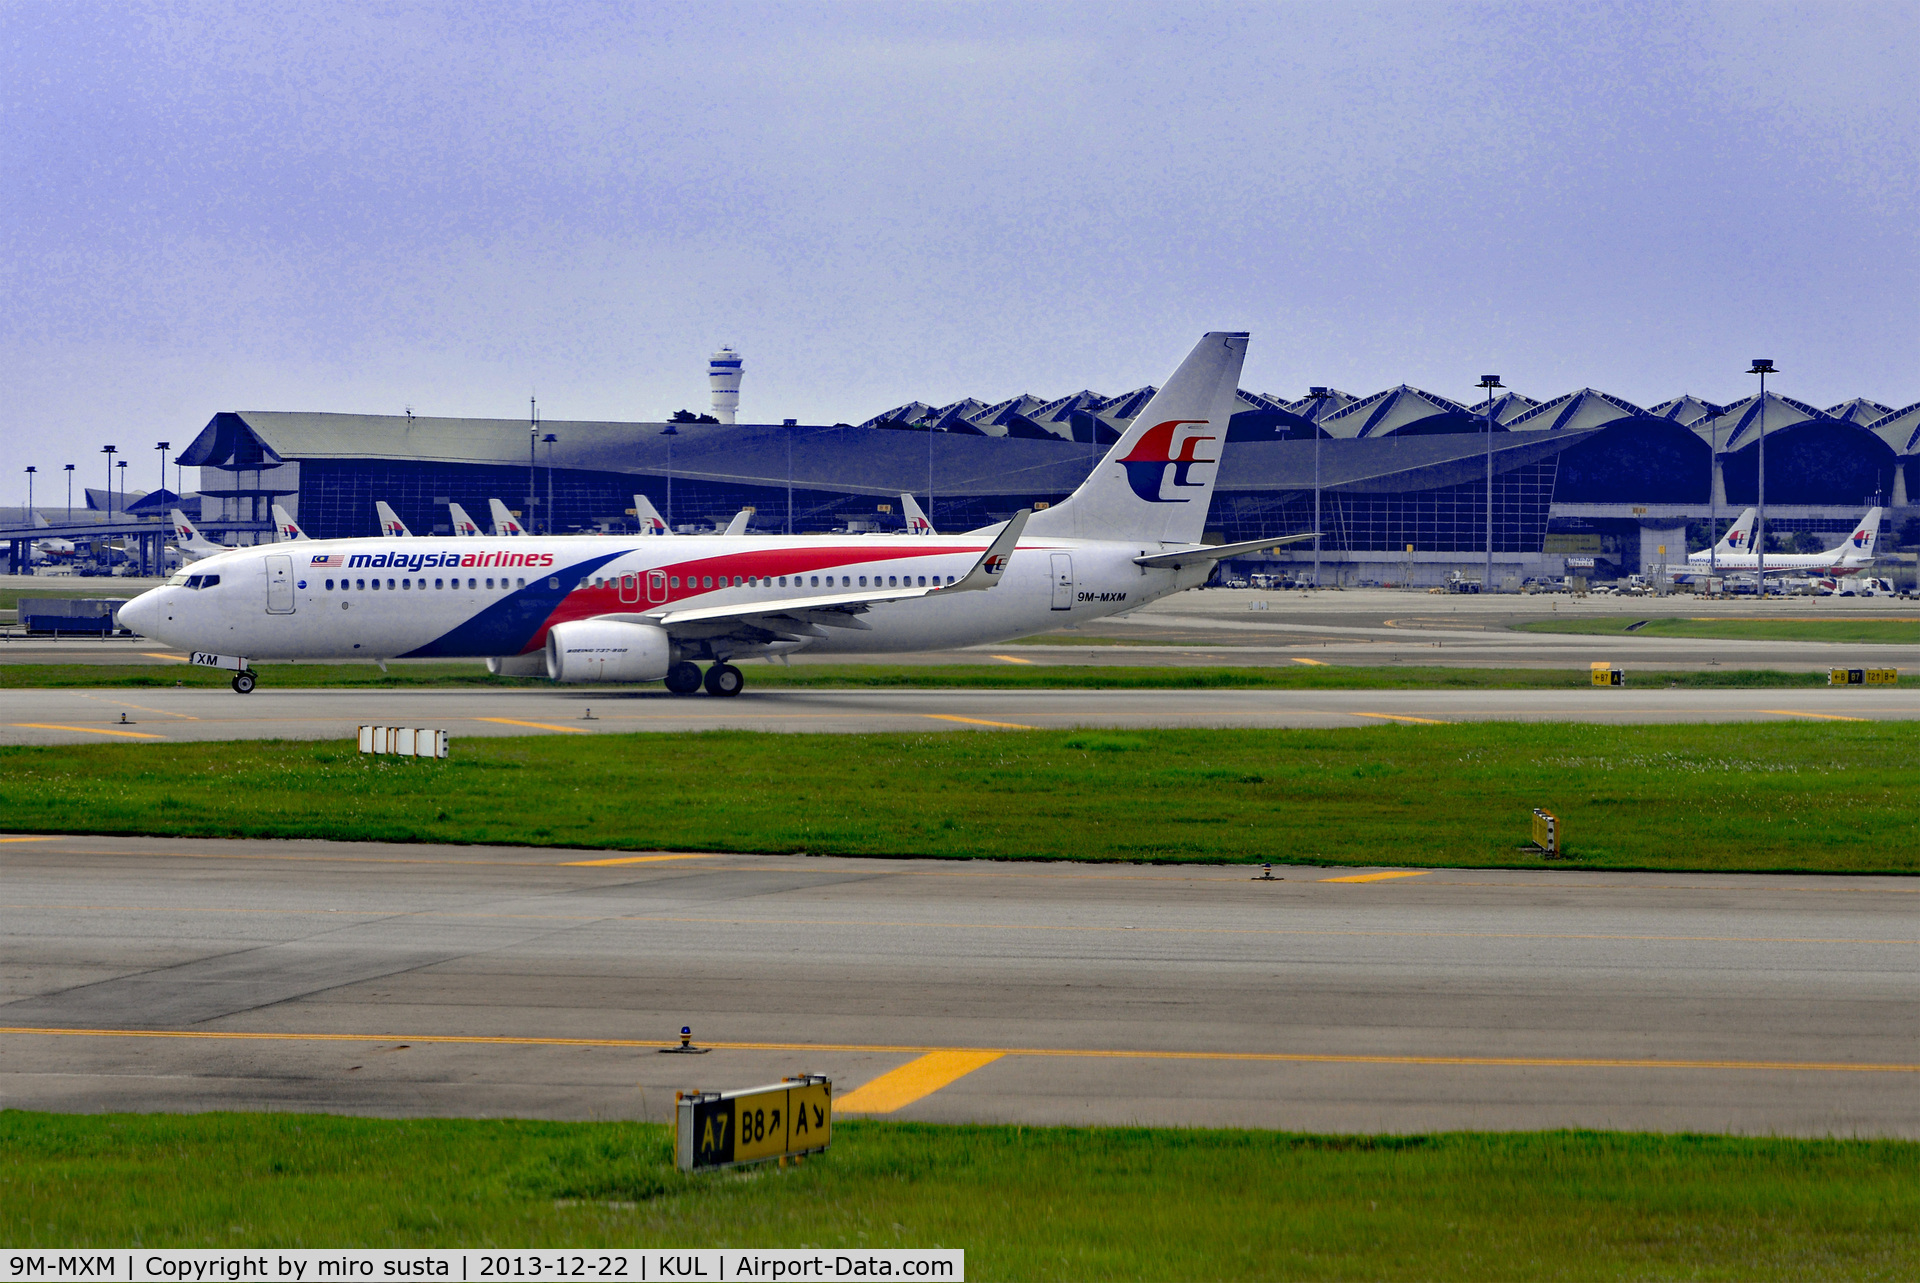 9M-MXM, 2012 Boeing 737-8H6 C/N 40140, Malaysian Airlines Boeing B737-8H6(WL) airplane ready for take off from Kuala Lumpur International Airport.